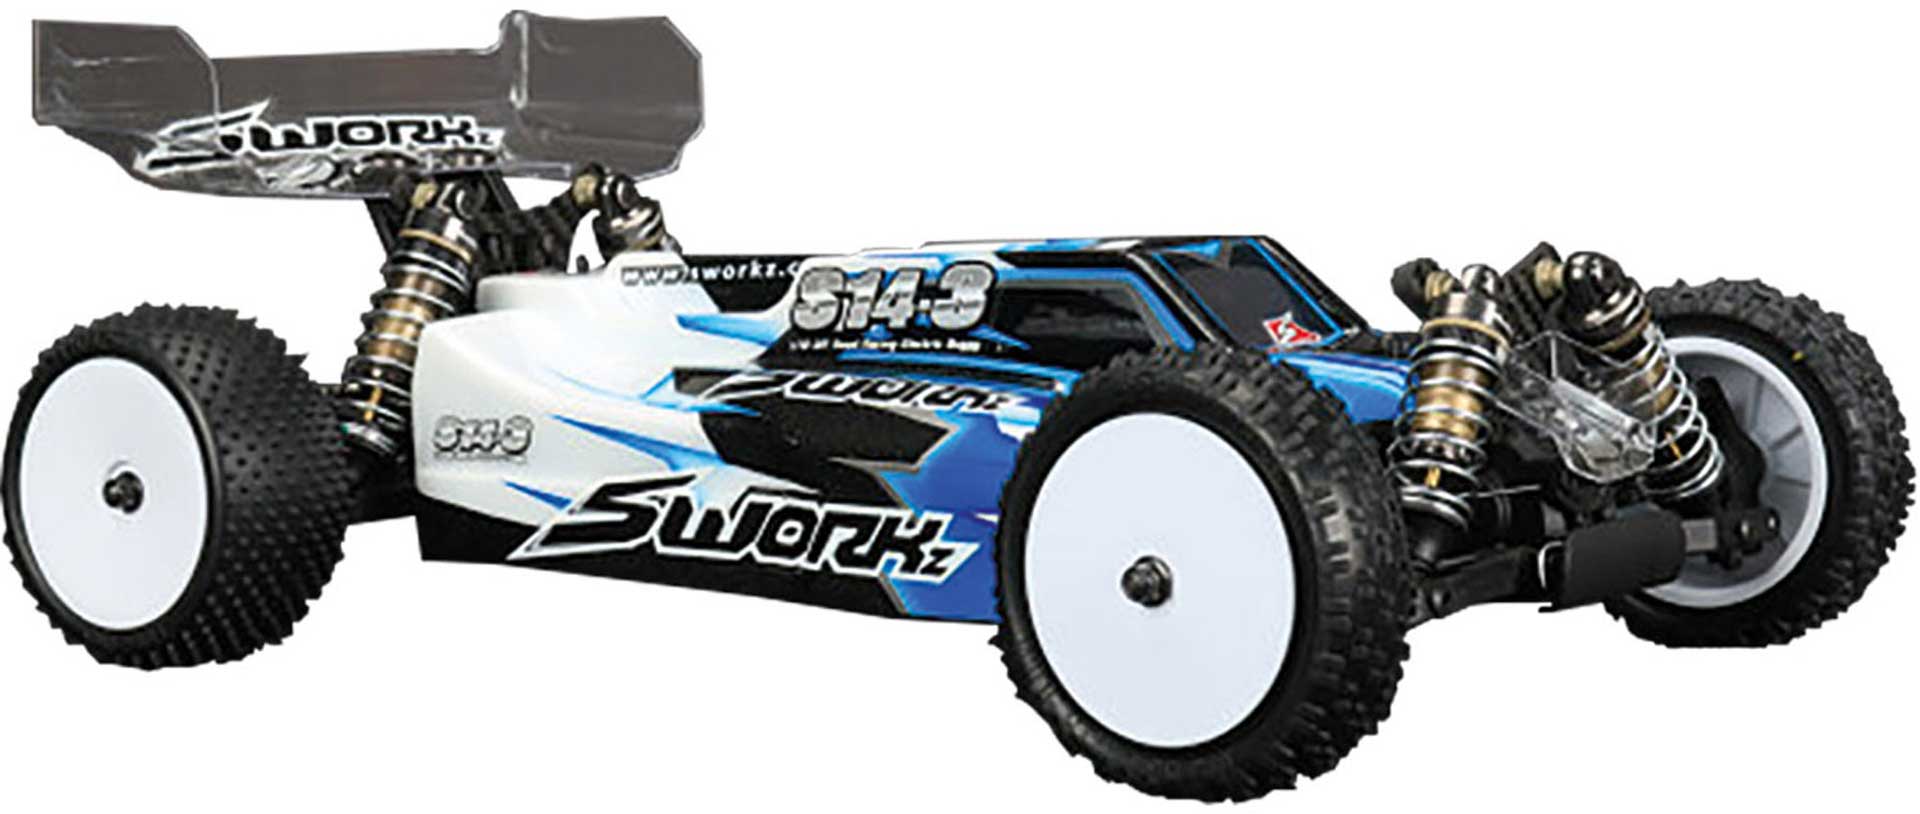 SWORKZ S14-3 1/10 4WD OFF-ROAD RACING BUGGY PRO KIT